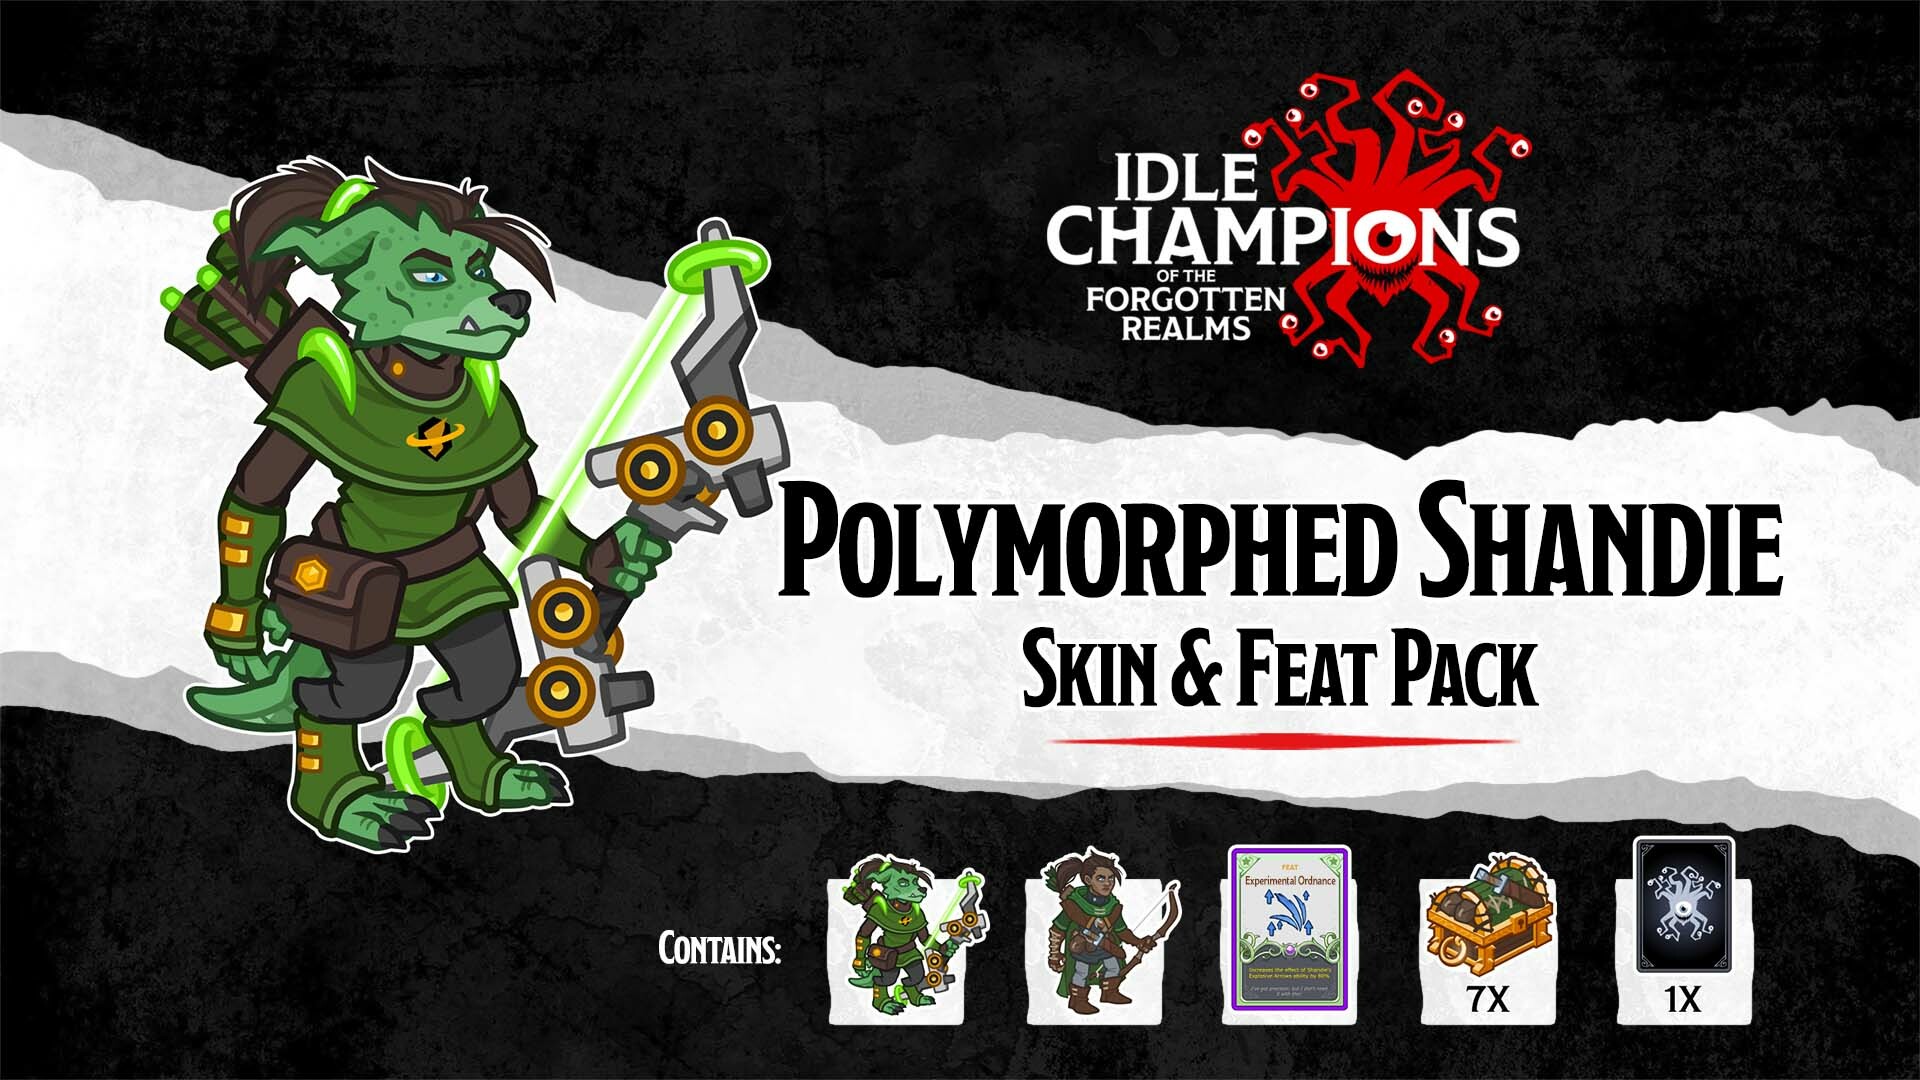 Idle Champions - Polymorphed Shandie Skin & Feat Pack DLC Steam CD Key, $1.02